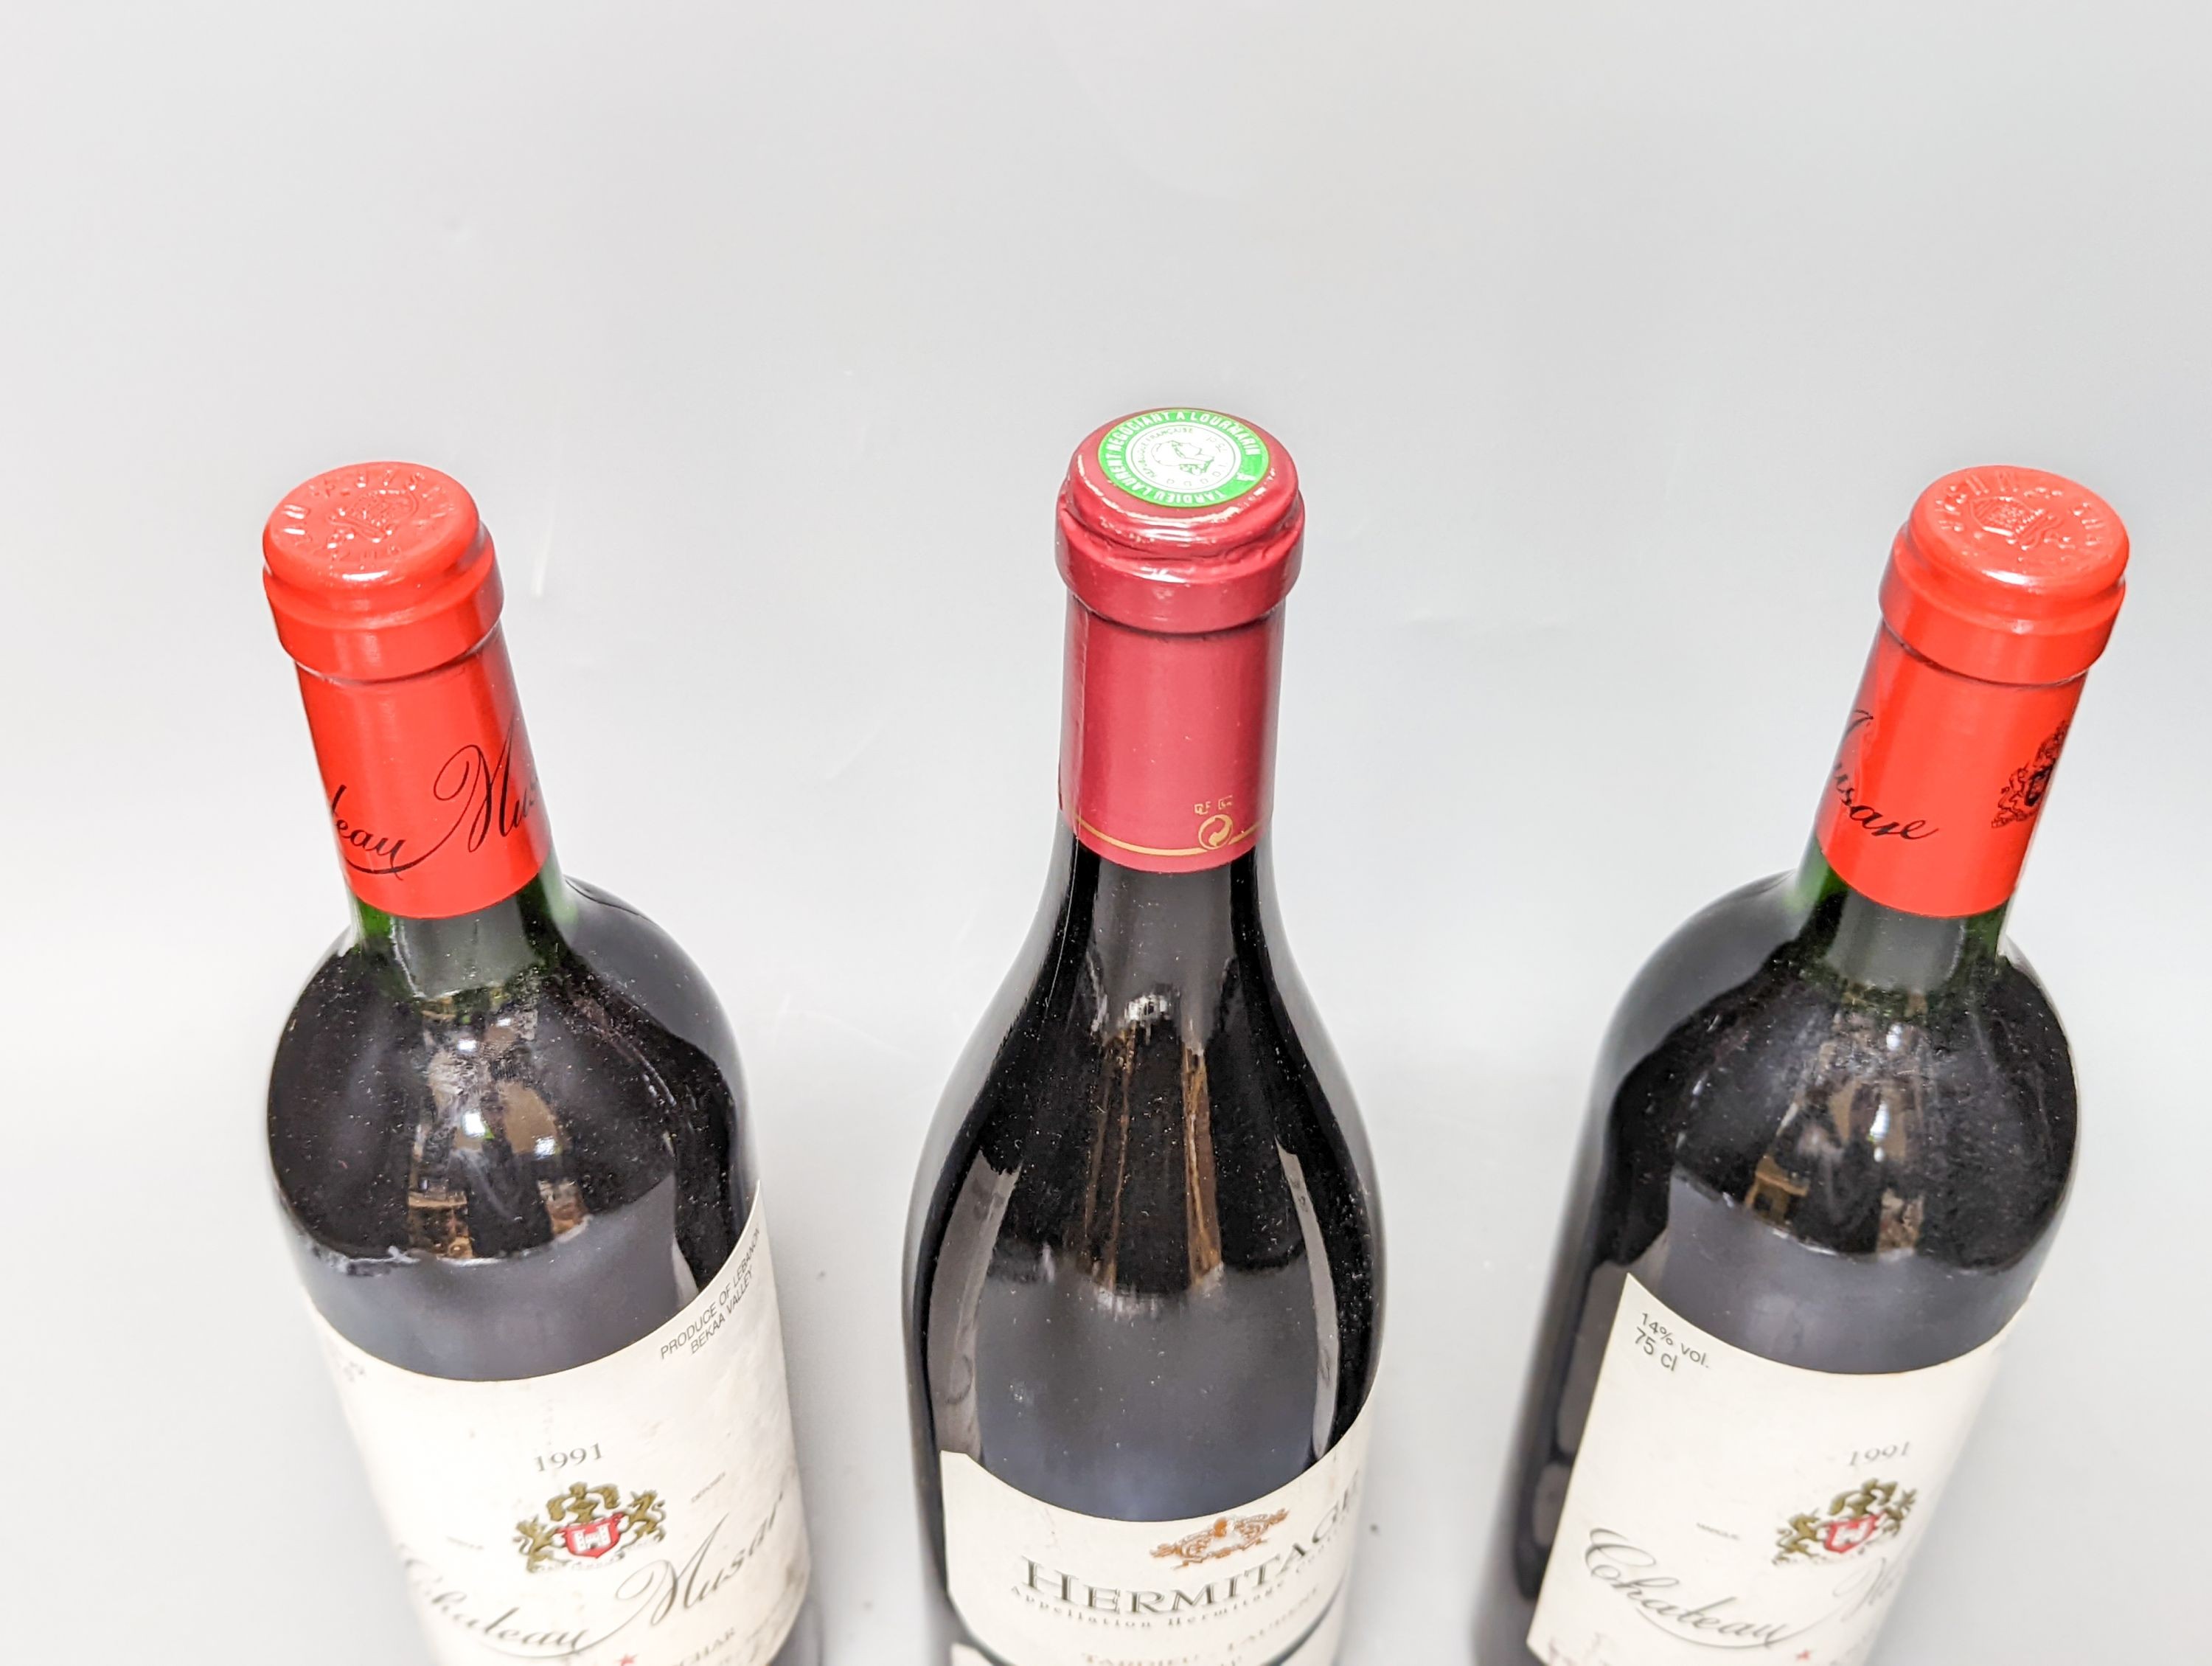 Two bottles of Chateau Musar 1991, and one bottle of Hermitage 1998